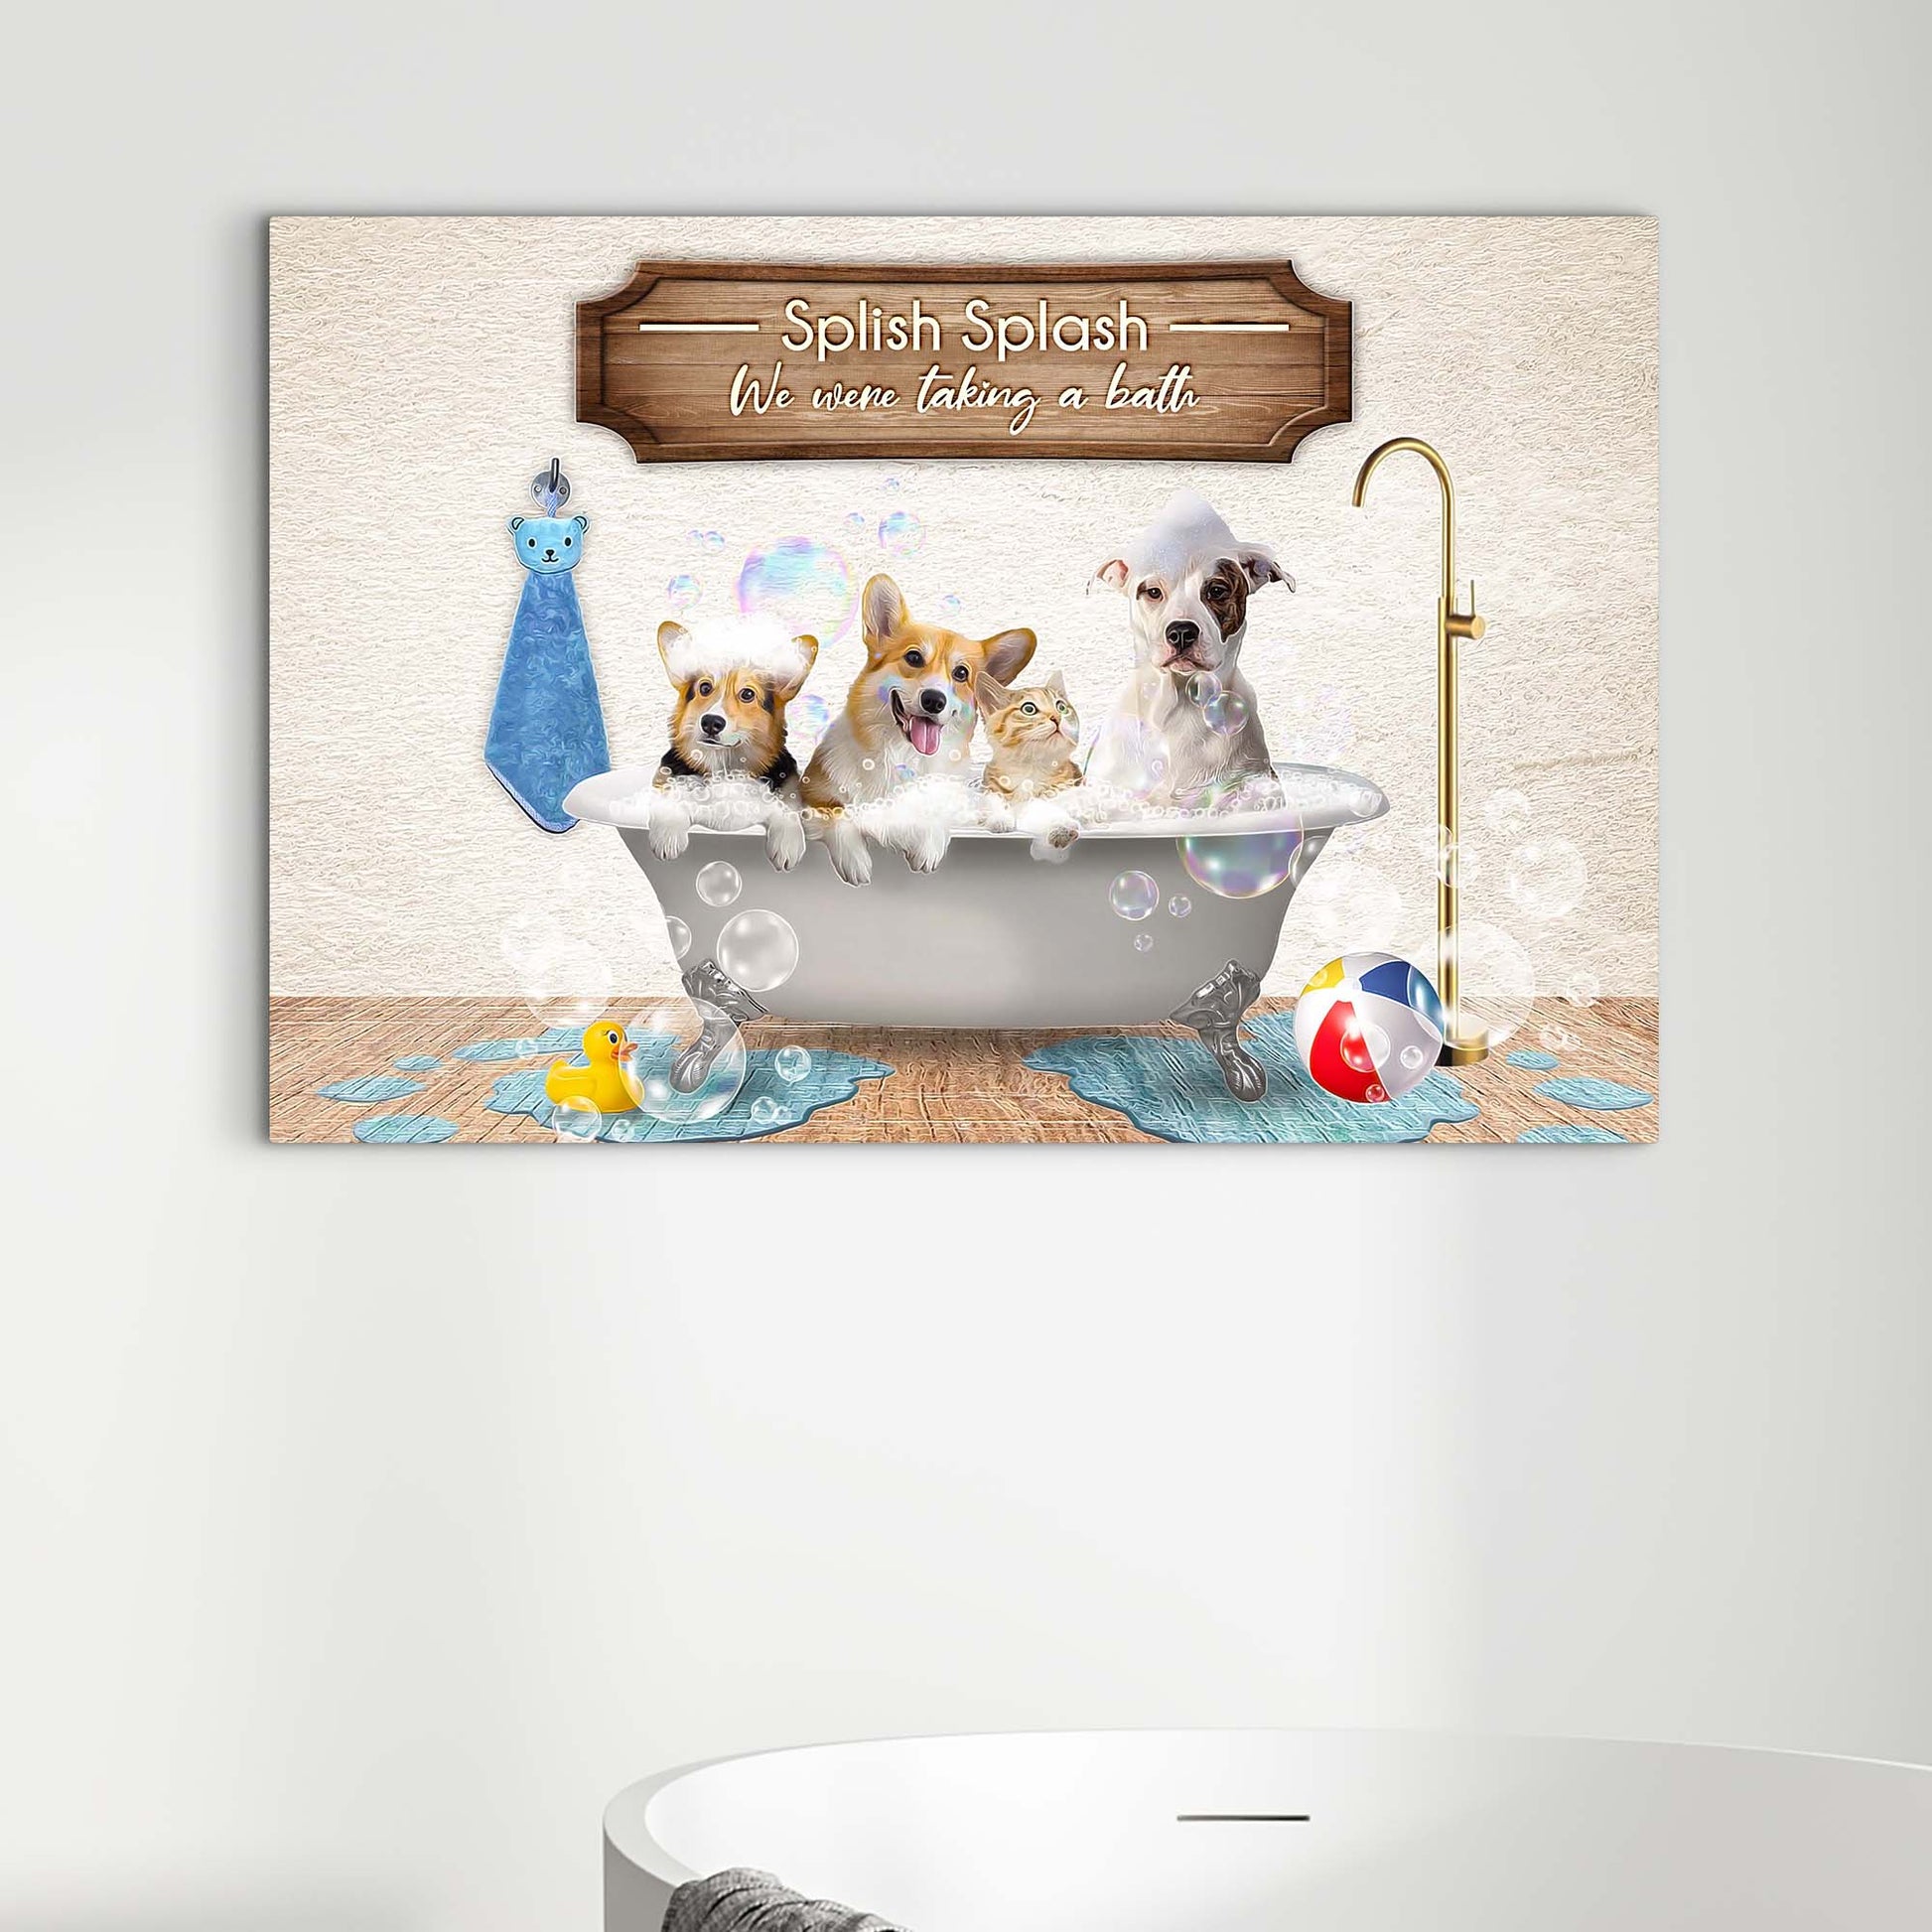 Splish Splash We Were Taking A Bath Sign Style 1 - Image by Tailored Canvases